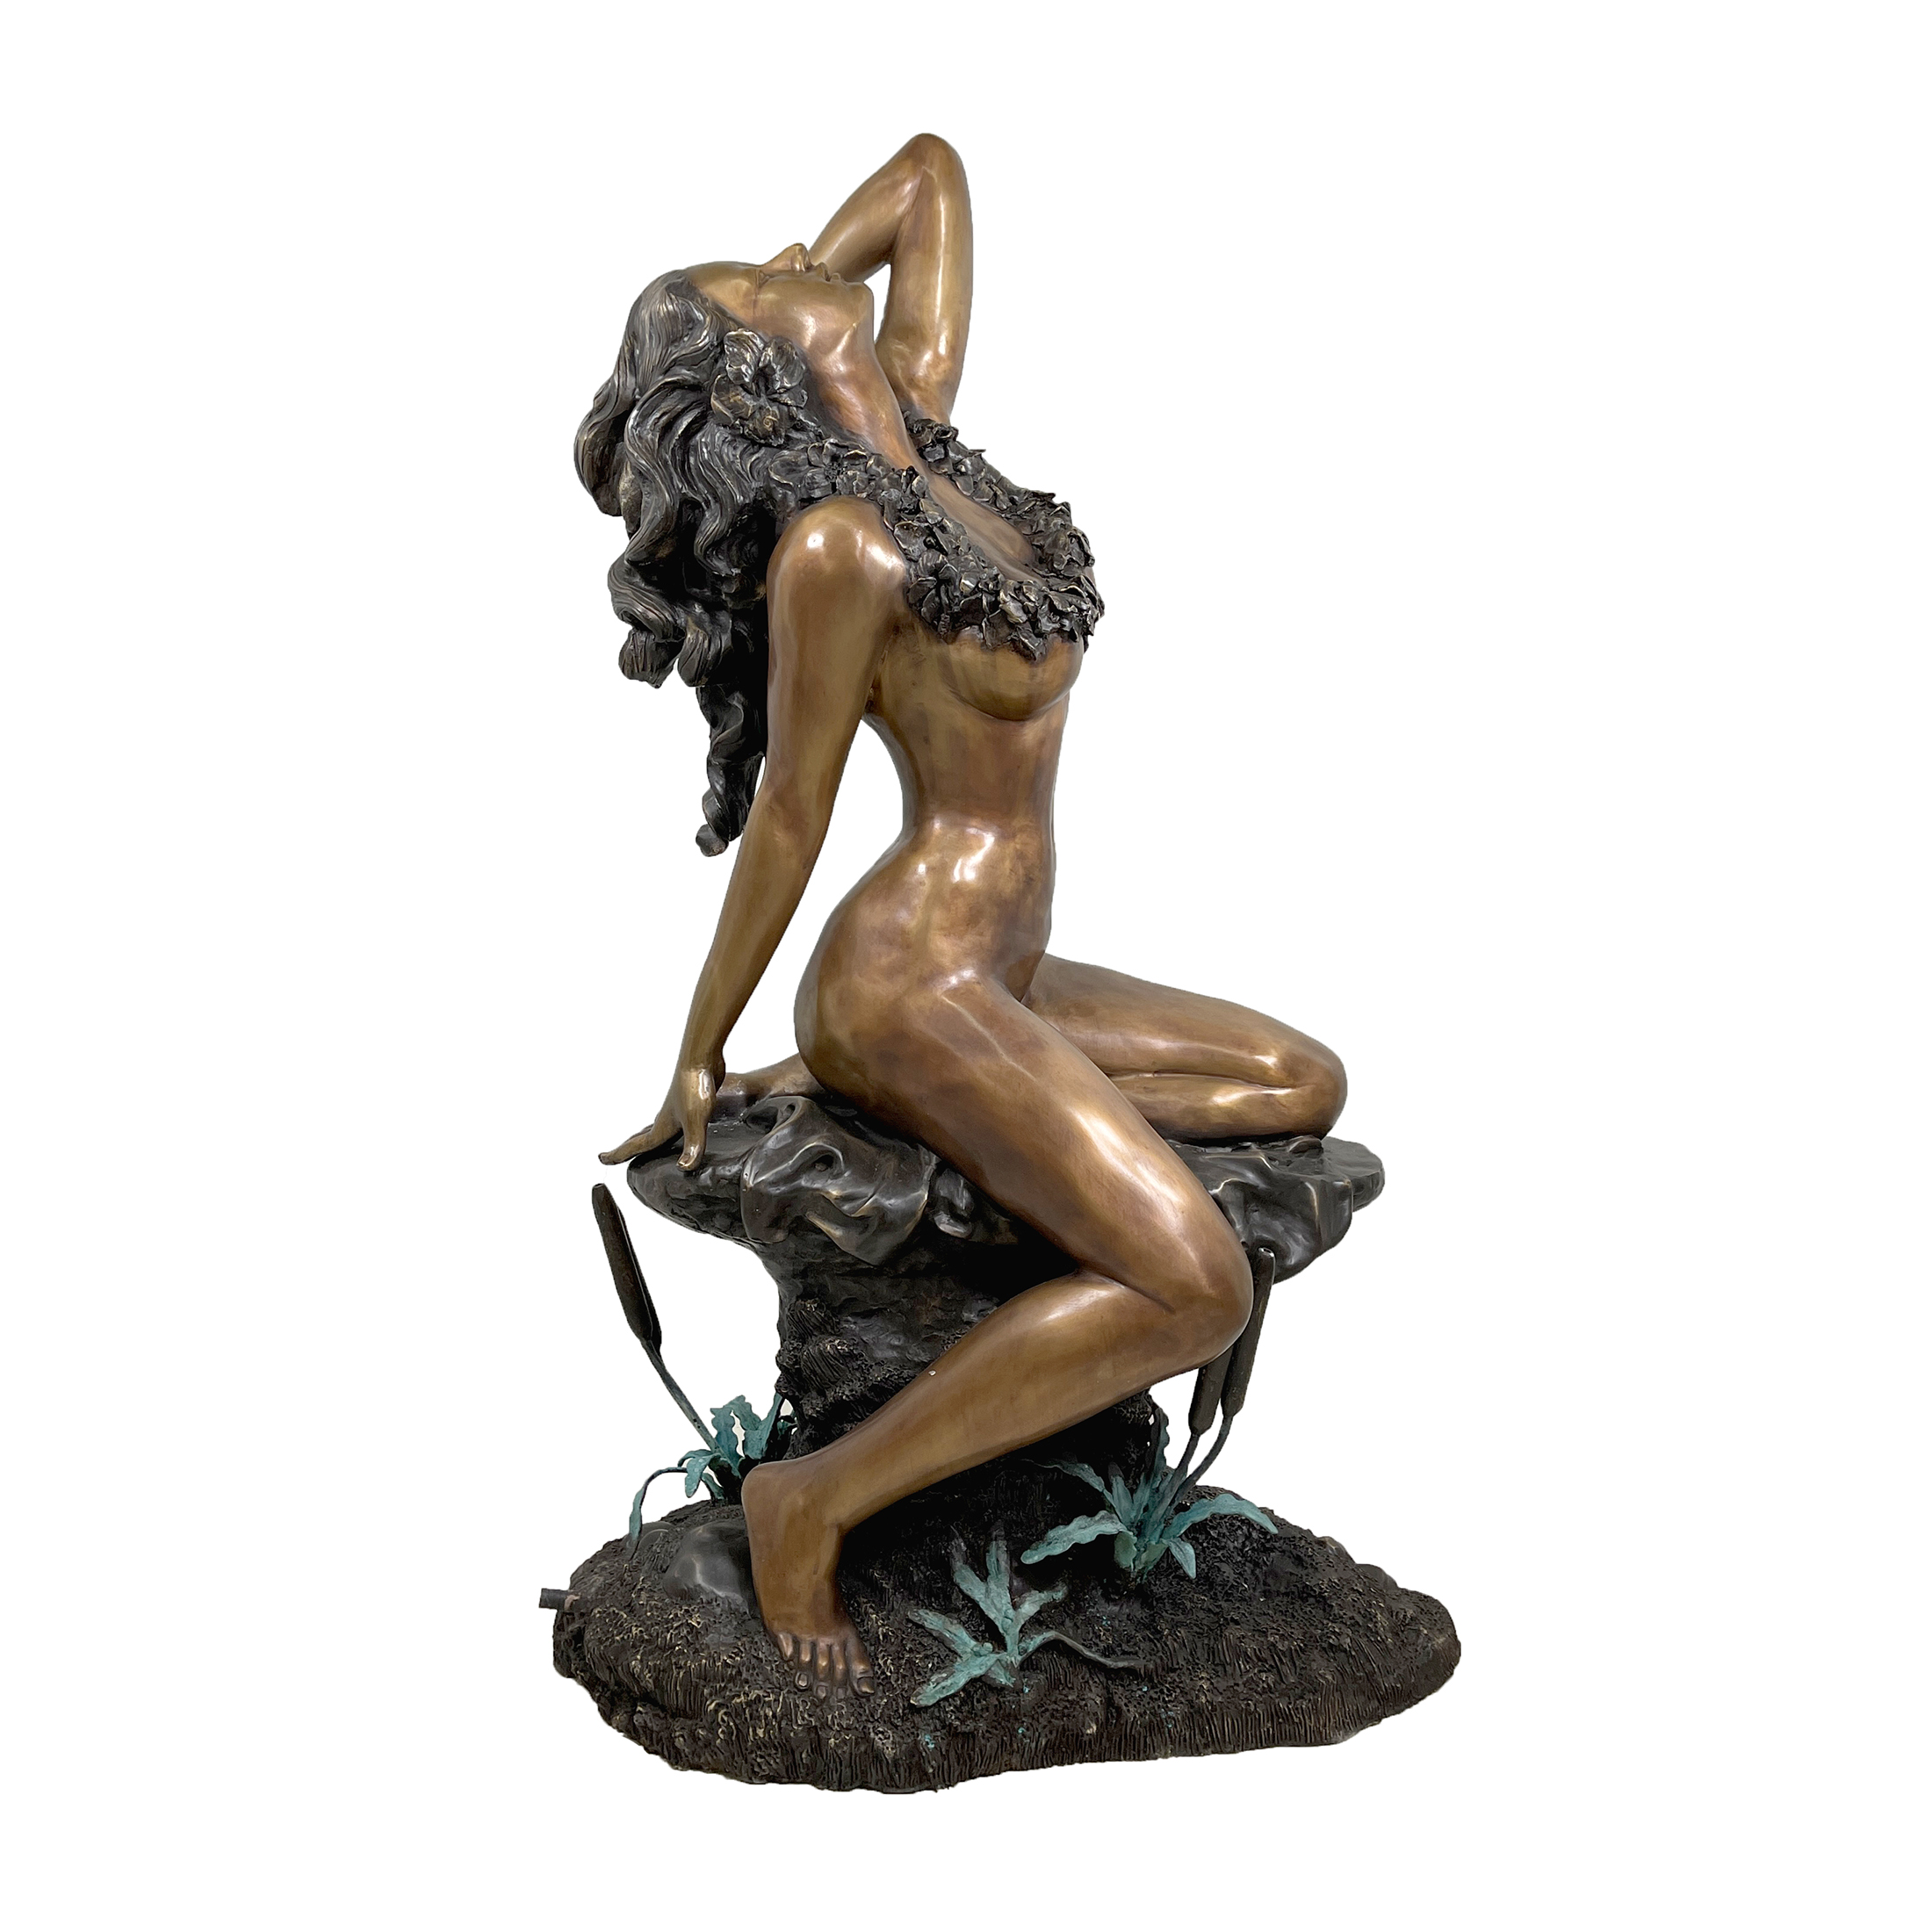 SRB10024 Bronze Hawaiian Lady Fountain Sculpture exclusively designed and produced by Metropolitan Galleries Inc